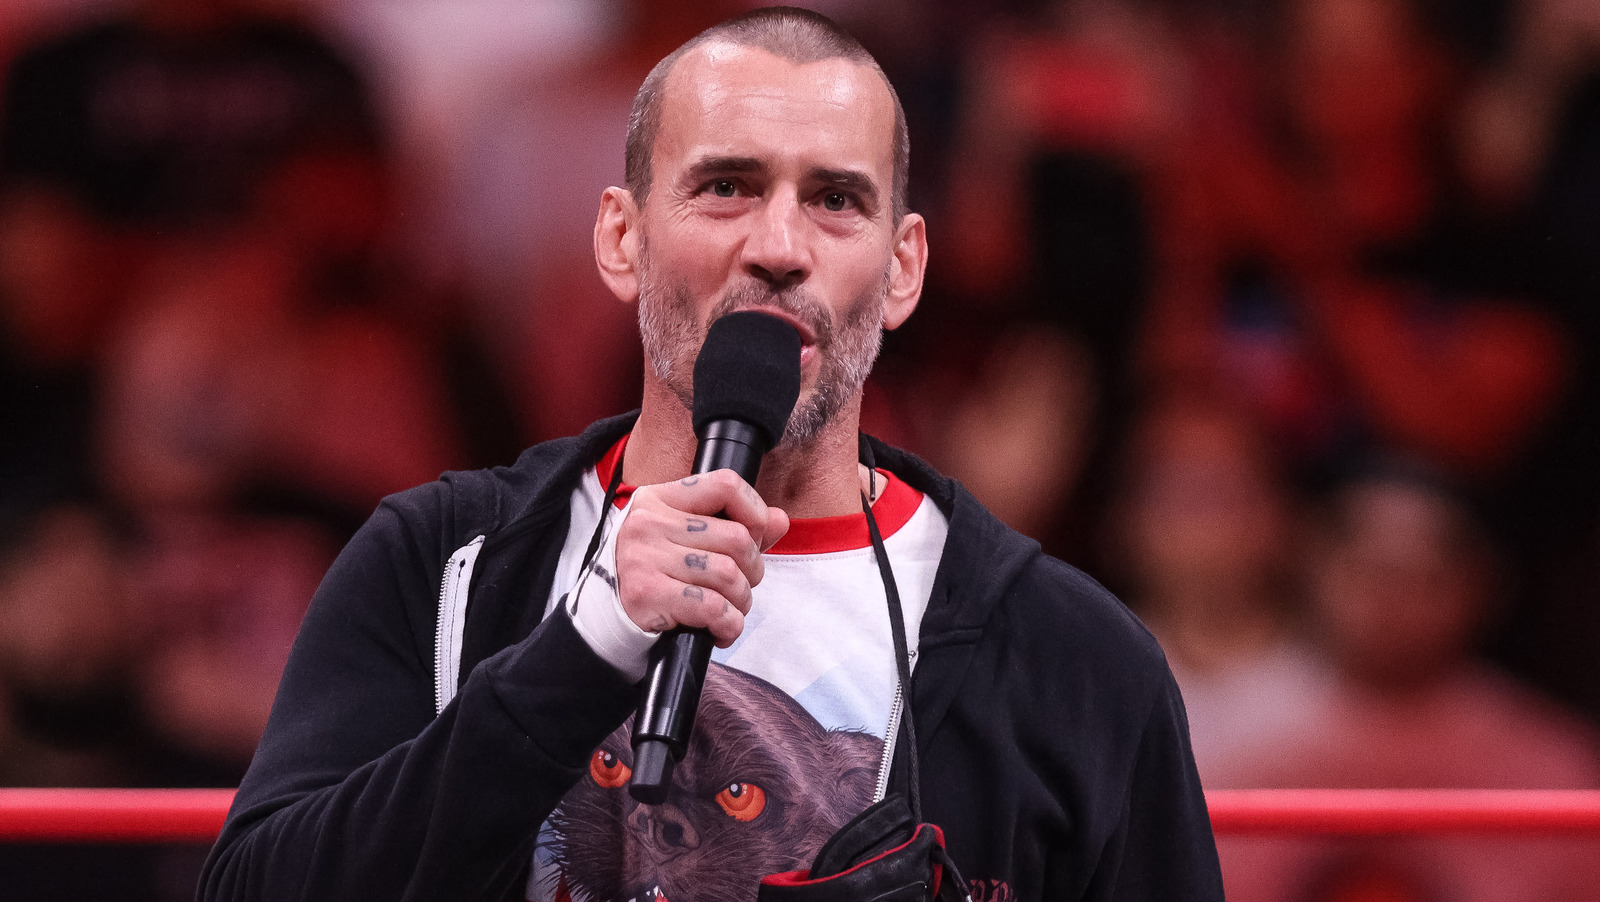 Jimmy Korderas Believes Someone Needs To 'Get A Handle' On Backstage AEW Issue